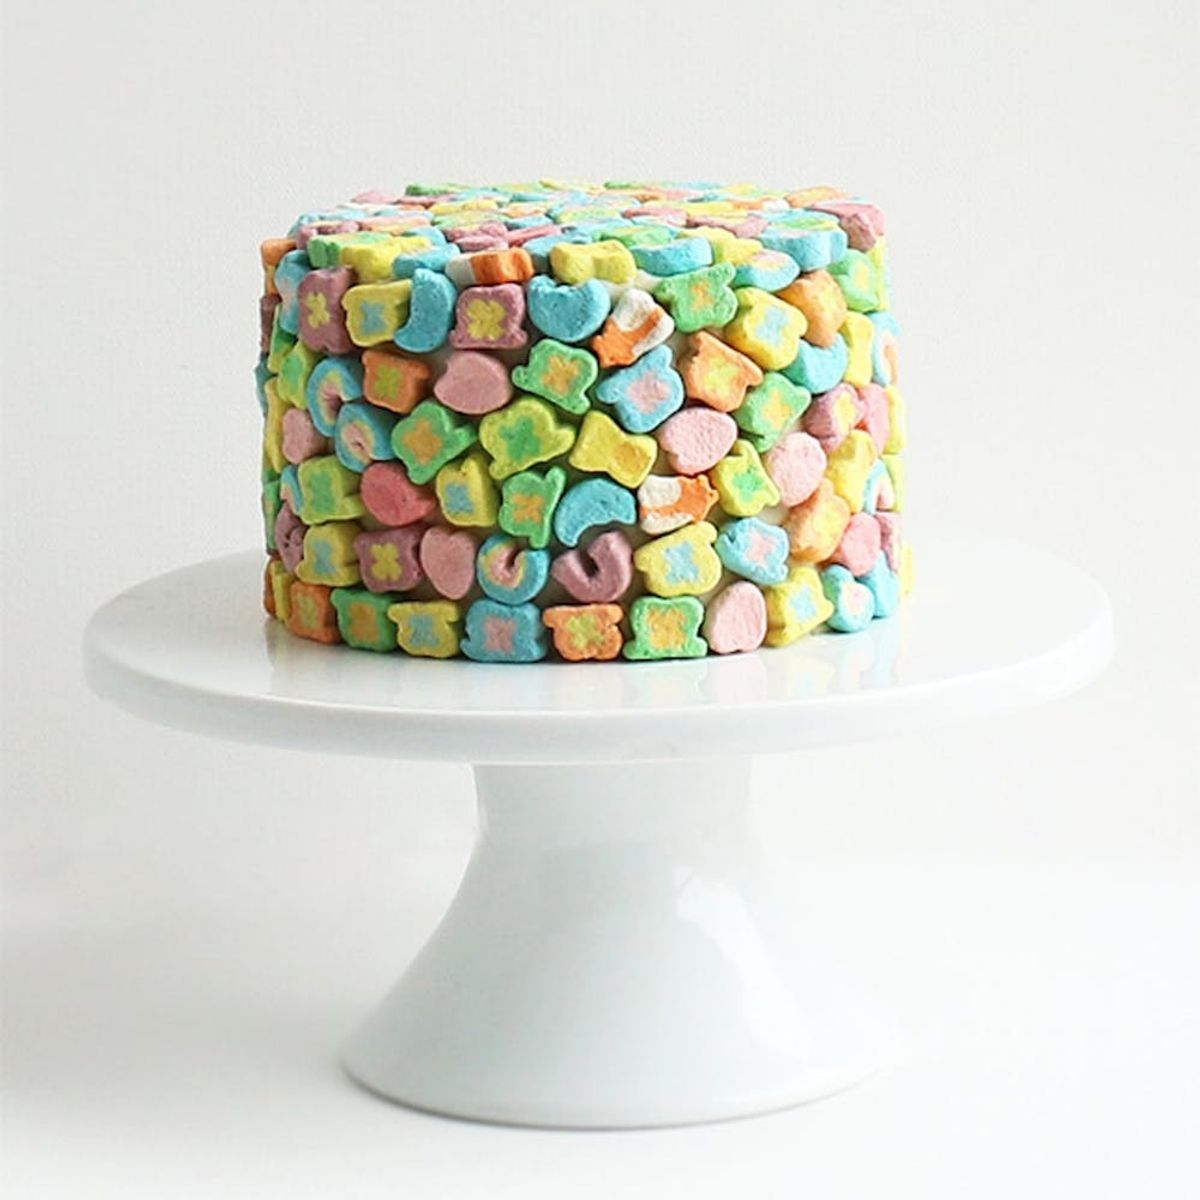 12 Throwback-Inspired Cake Recipes Every ’90s Kid Will Love